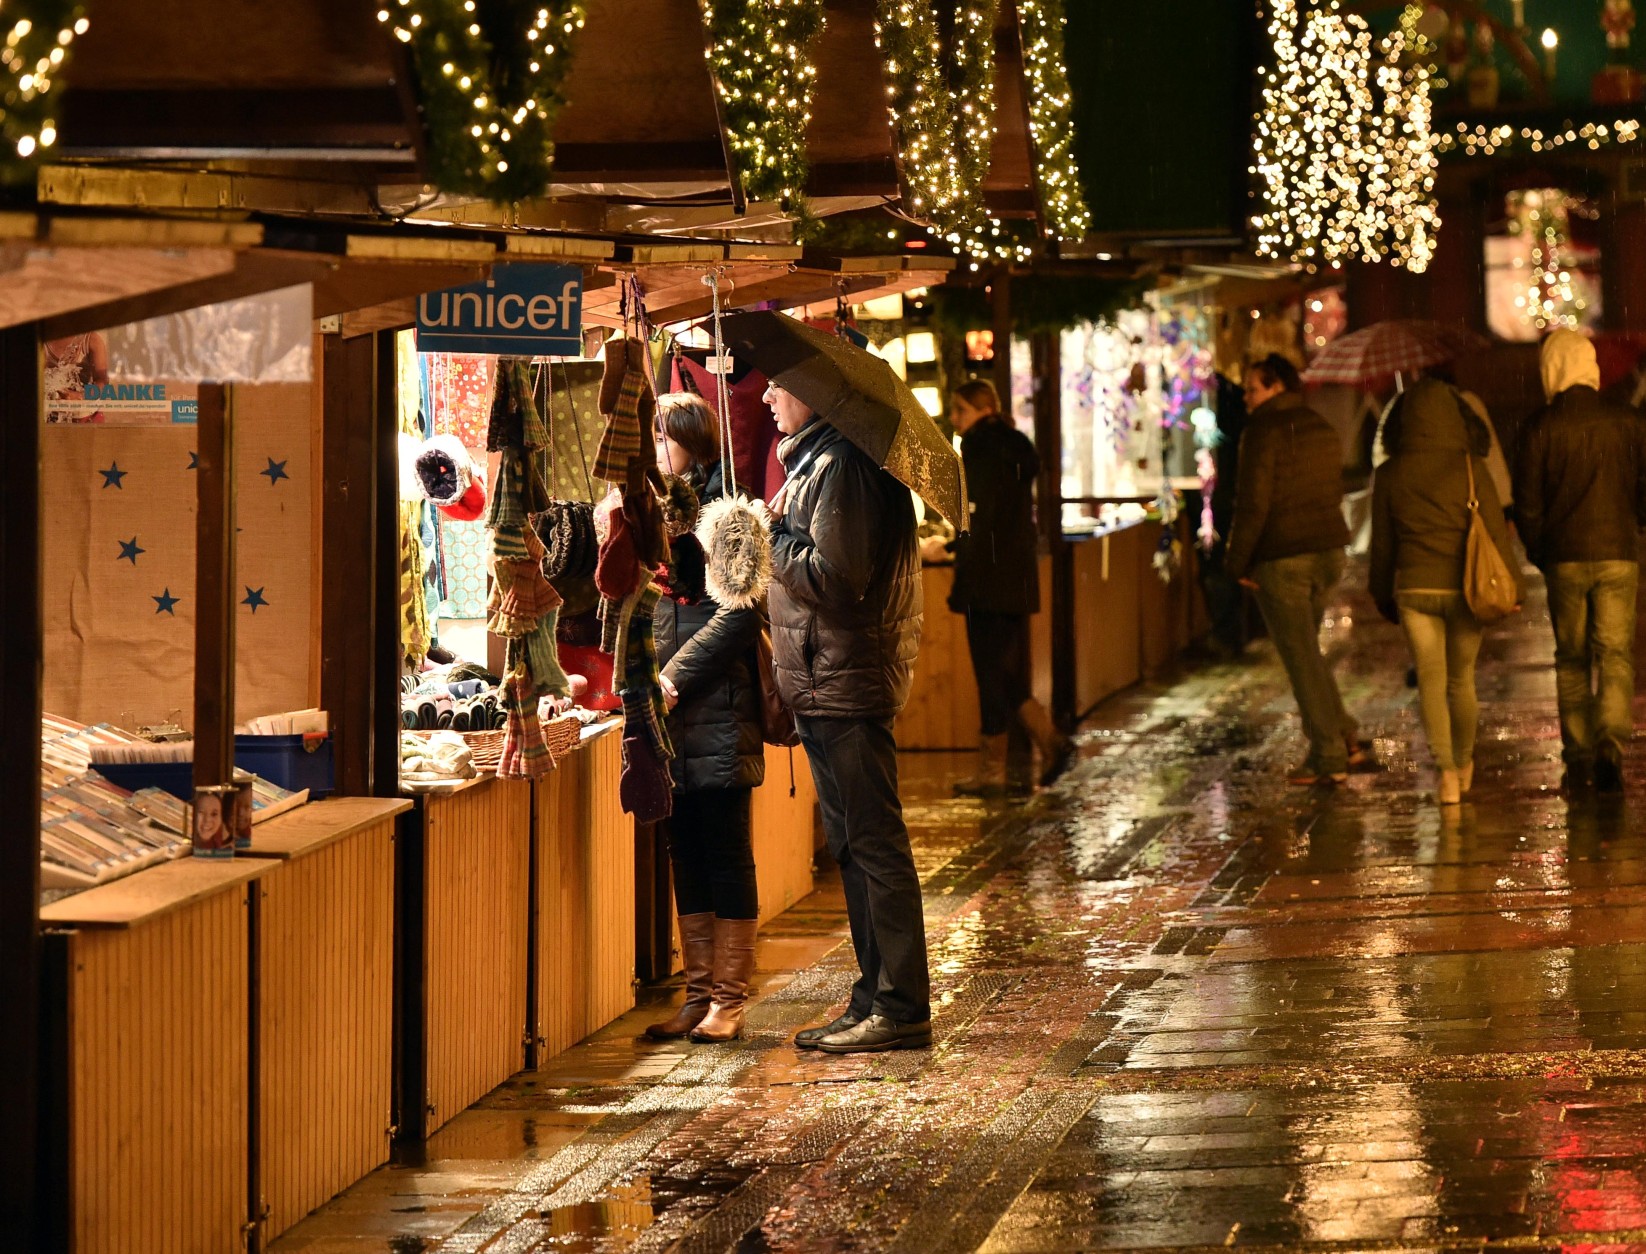 Only a few people came to the opening of the traditional Christmas market in Essen, Germany, Thursday, Nov. 19, 2015. The markets, favorites among locals and tourists for decorations and mulled wine, are feared to be possible targets for attacks. (AP Photo/Martin Meissner)